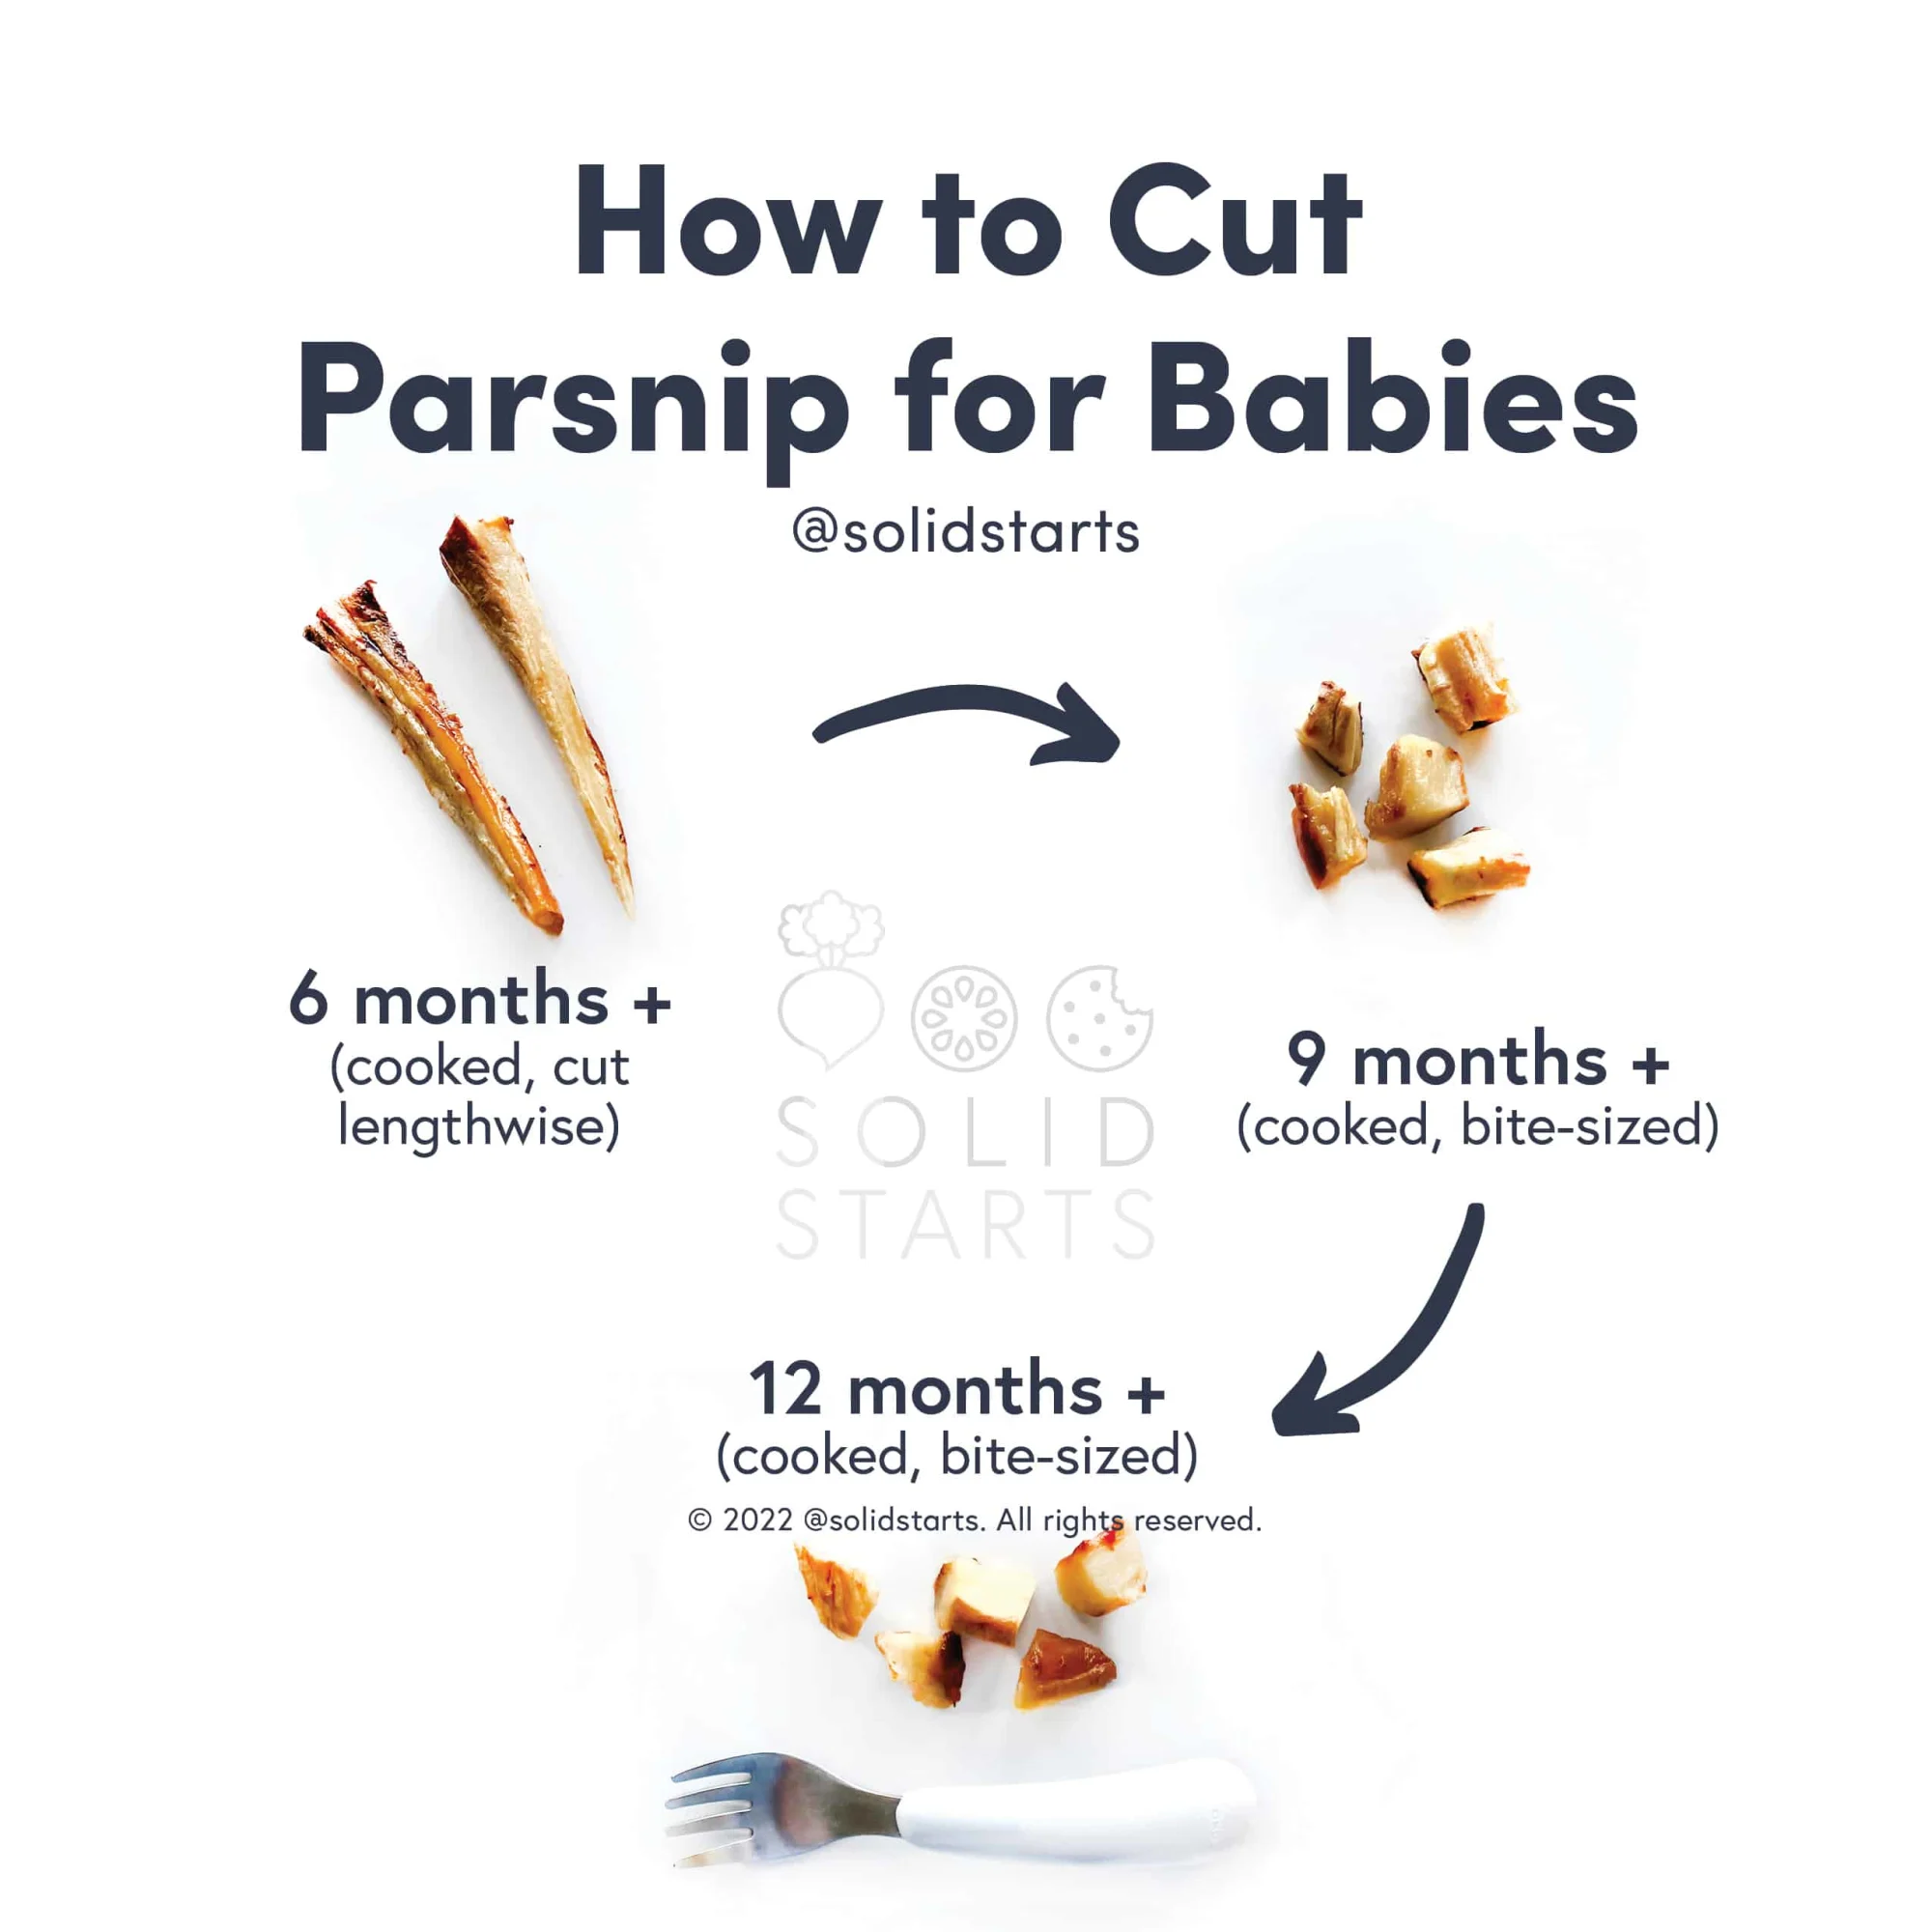 a Solid Starts infographic with the header How to Cut Parsnip for Babies: cooked spears cut lengthwise for 6 mos+, cooked bite sized pieces for 9 mos+, and cooked bite-sized pieces with a fork for 12 mos+